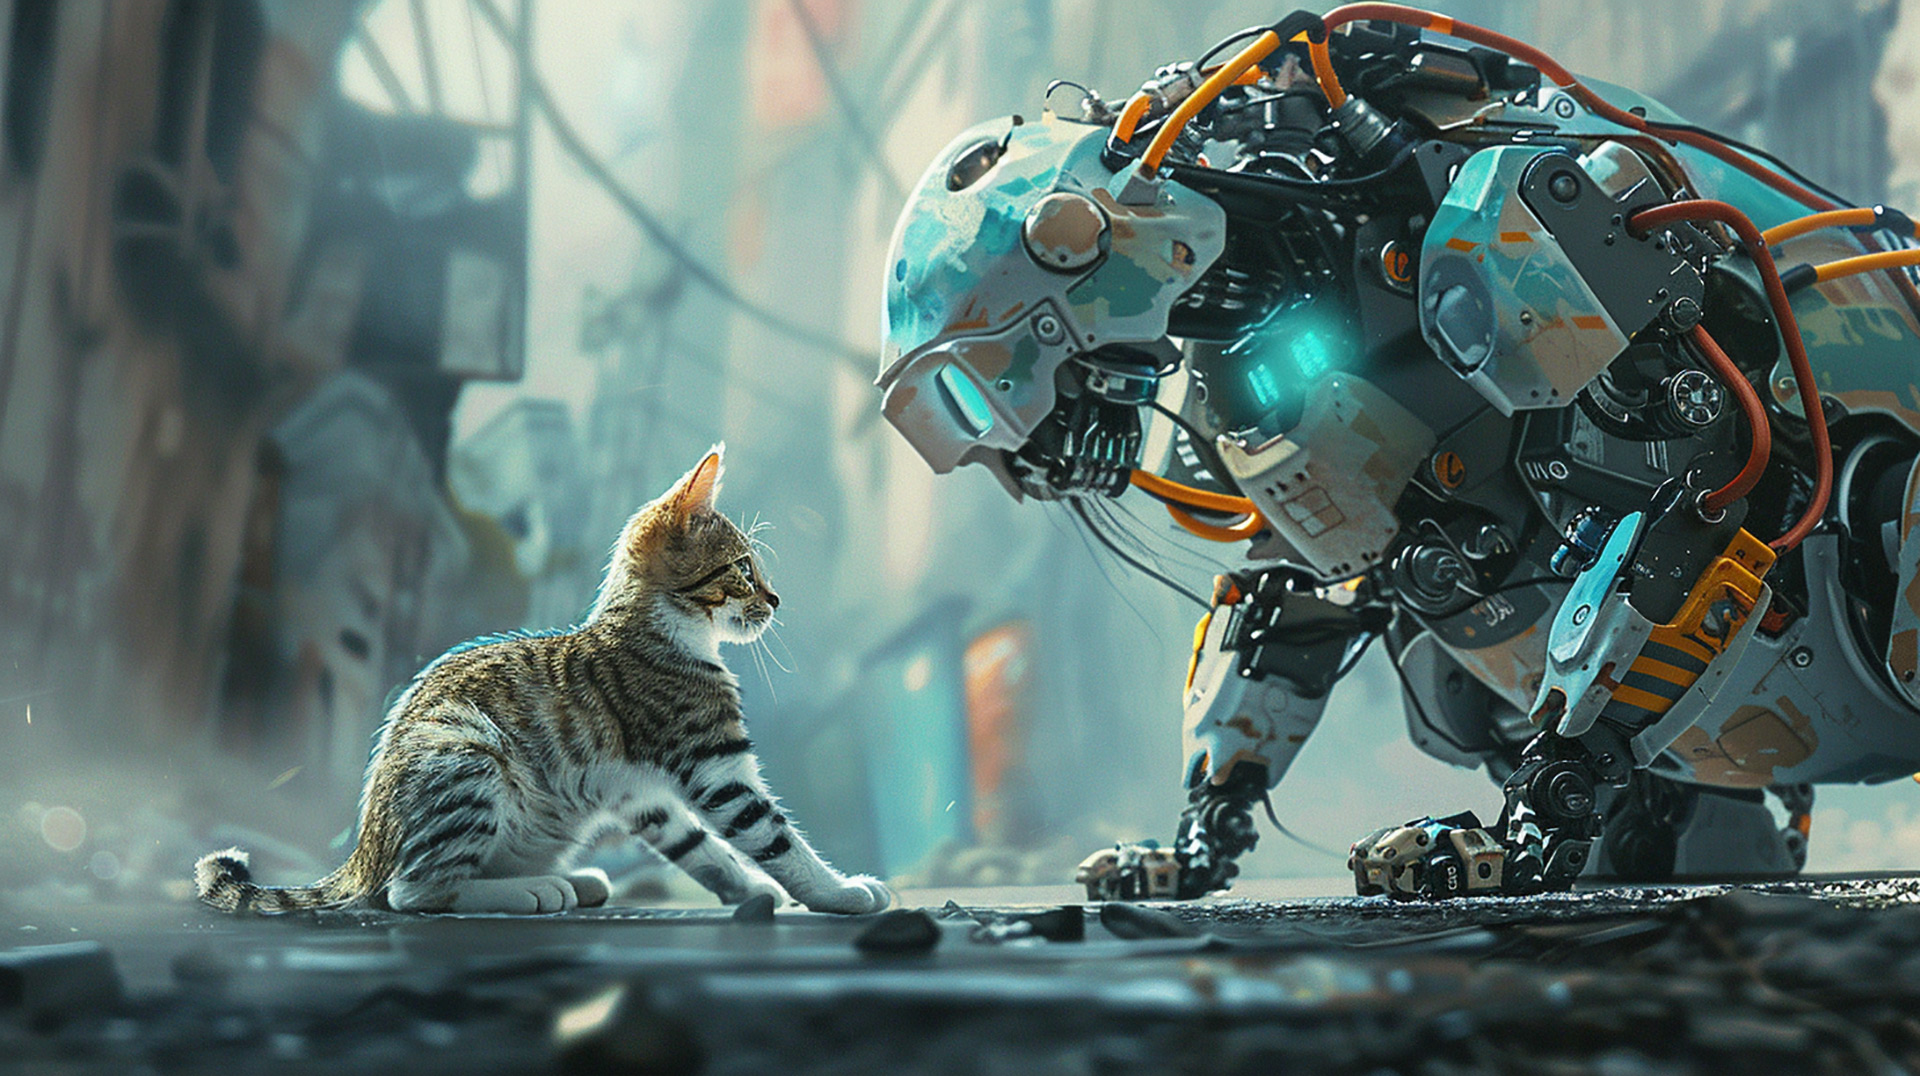 Experience the Clash: Robot Cats Fighting in 1920x1080